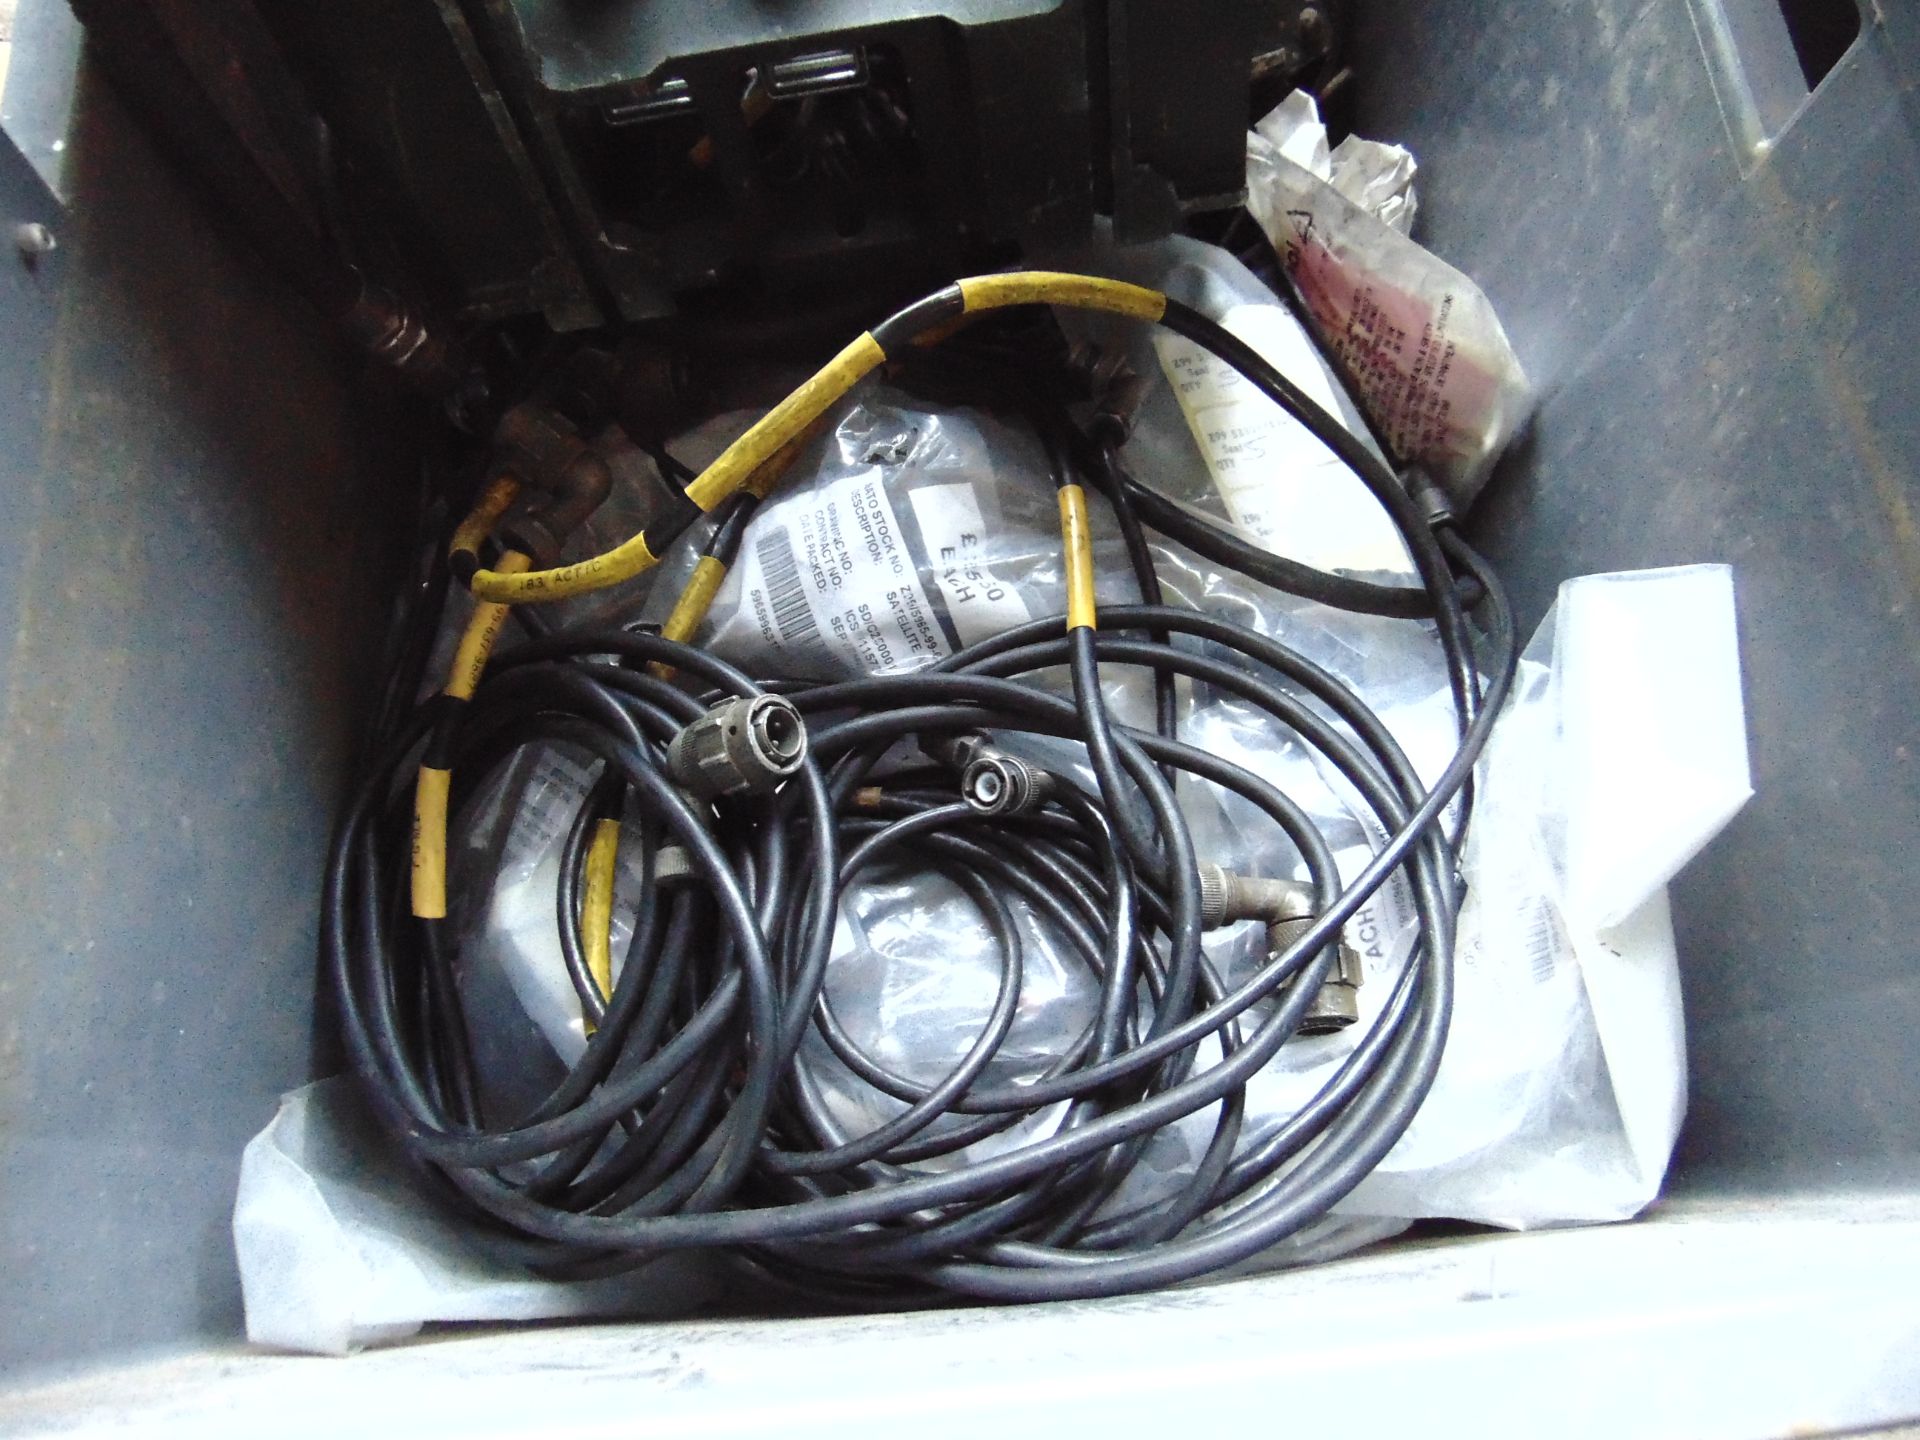 Clansman Radio Cables, Battery Charger ect - Image 5 of 5